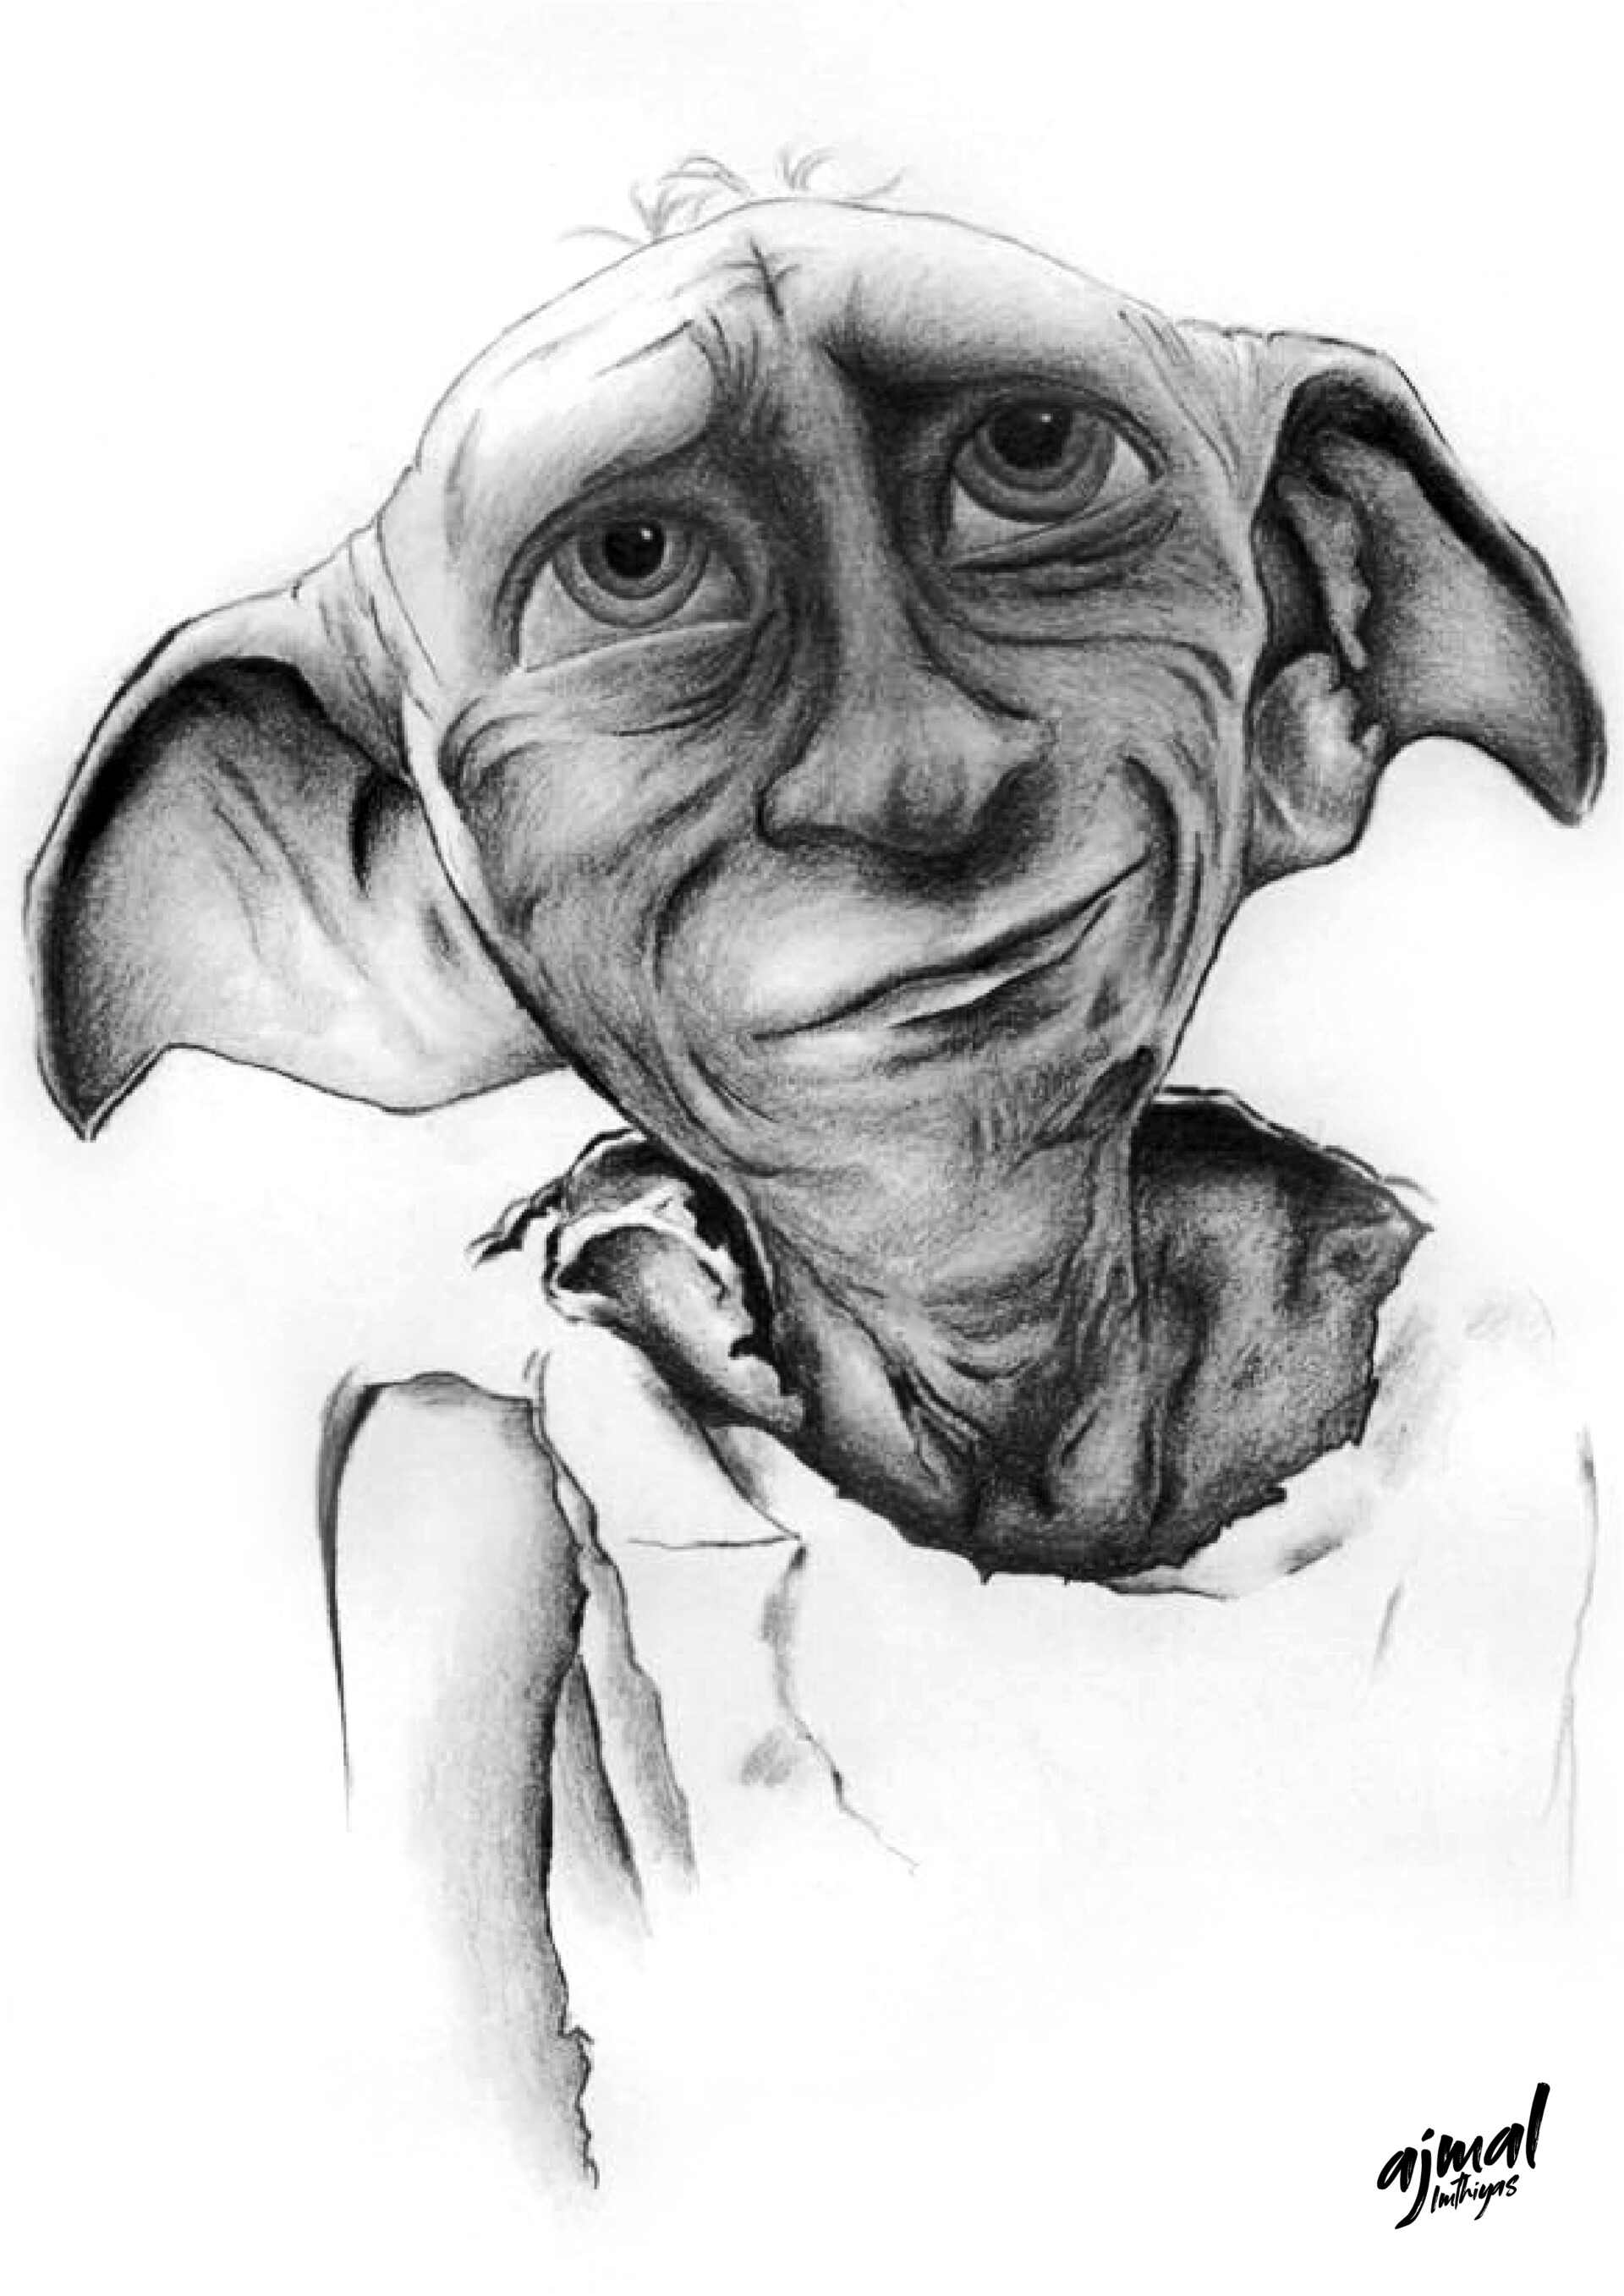 How To Draw Dobby Harry Potter Harry potter is a series of fantasy